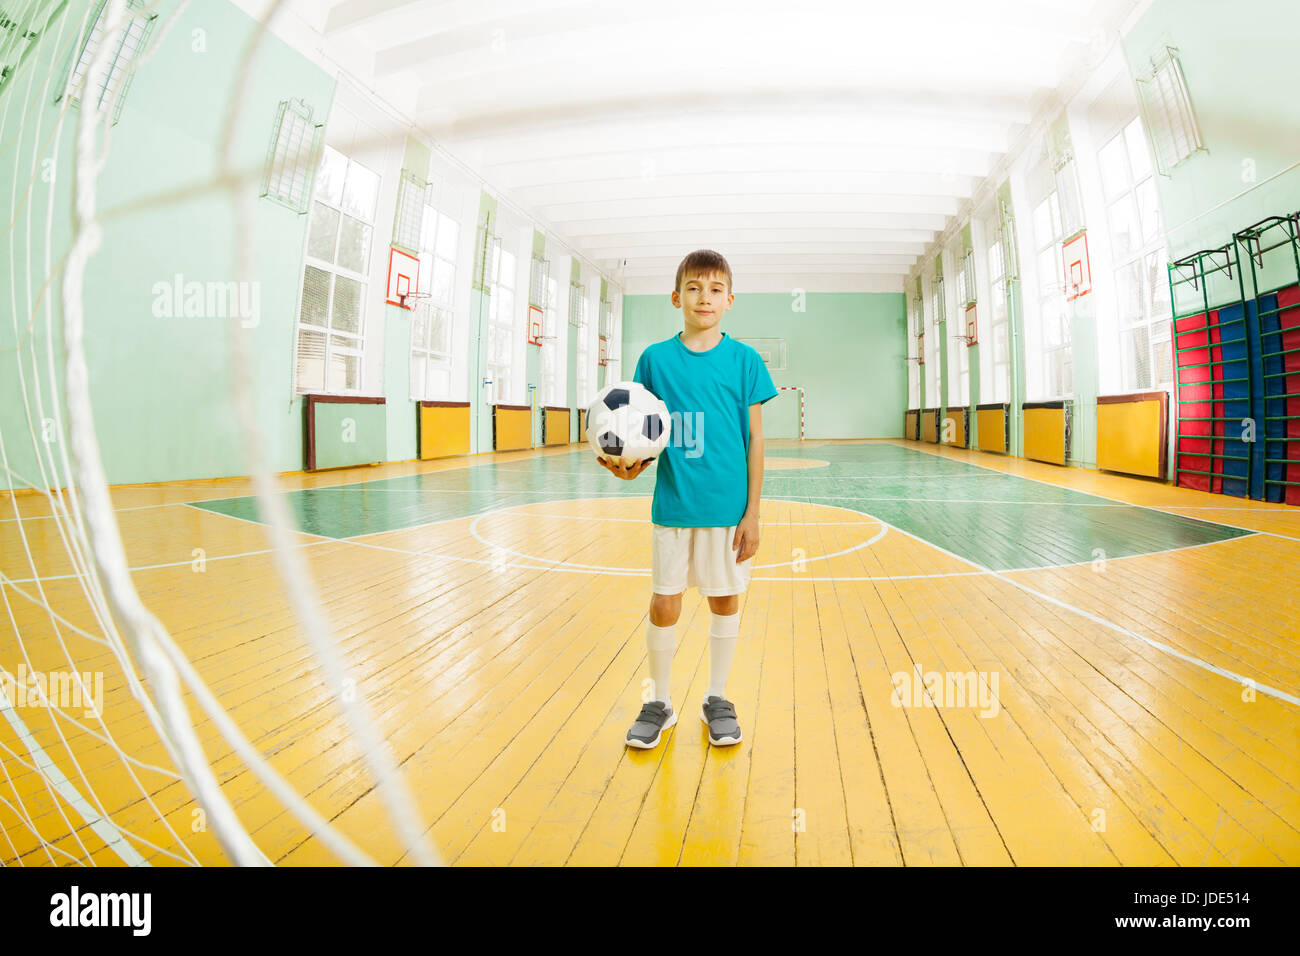 Full-length portrait of 12 years old boy in football uniform, standing in school gymnasium, holding soccer ball, shot through the gate net Stock Photo